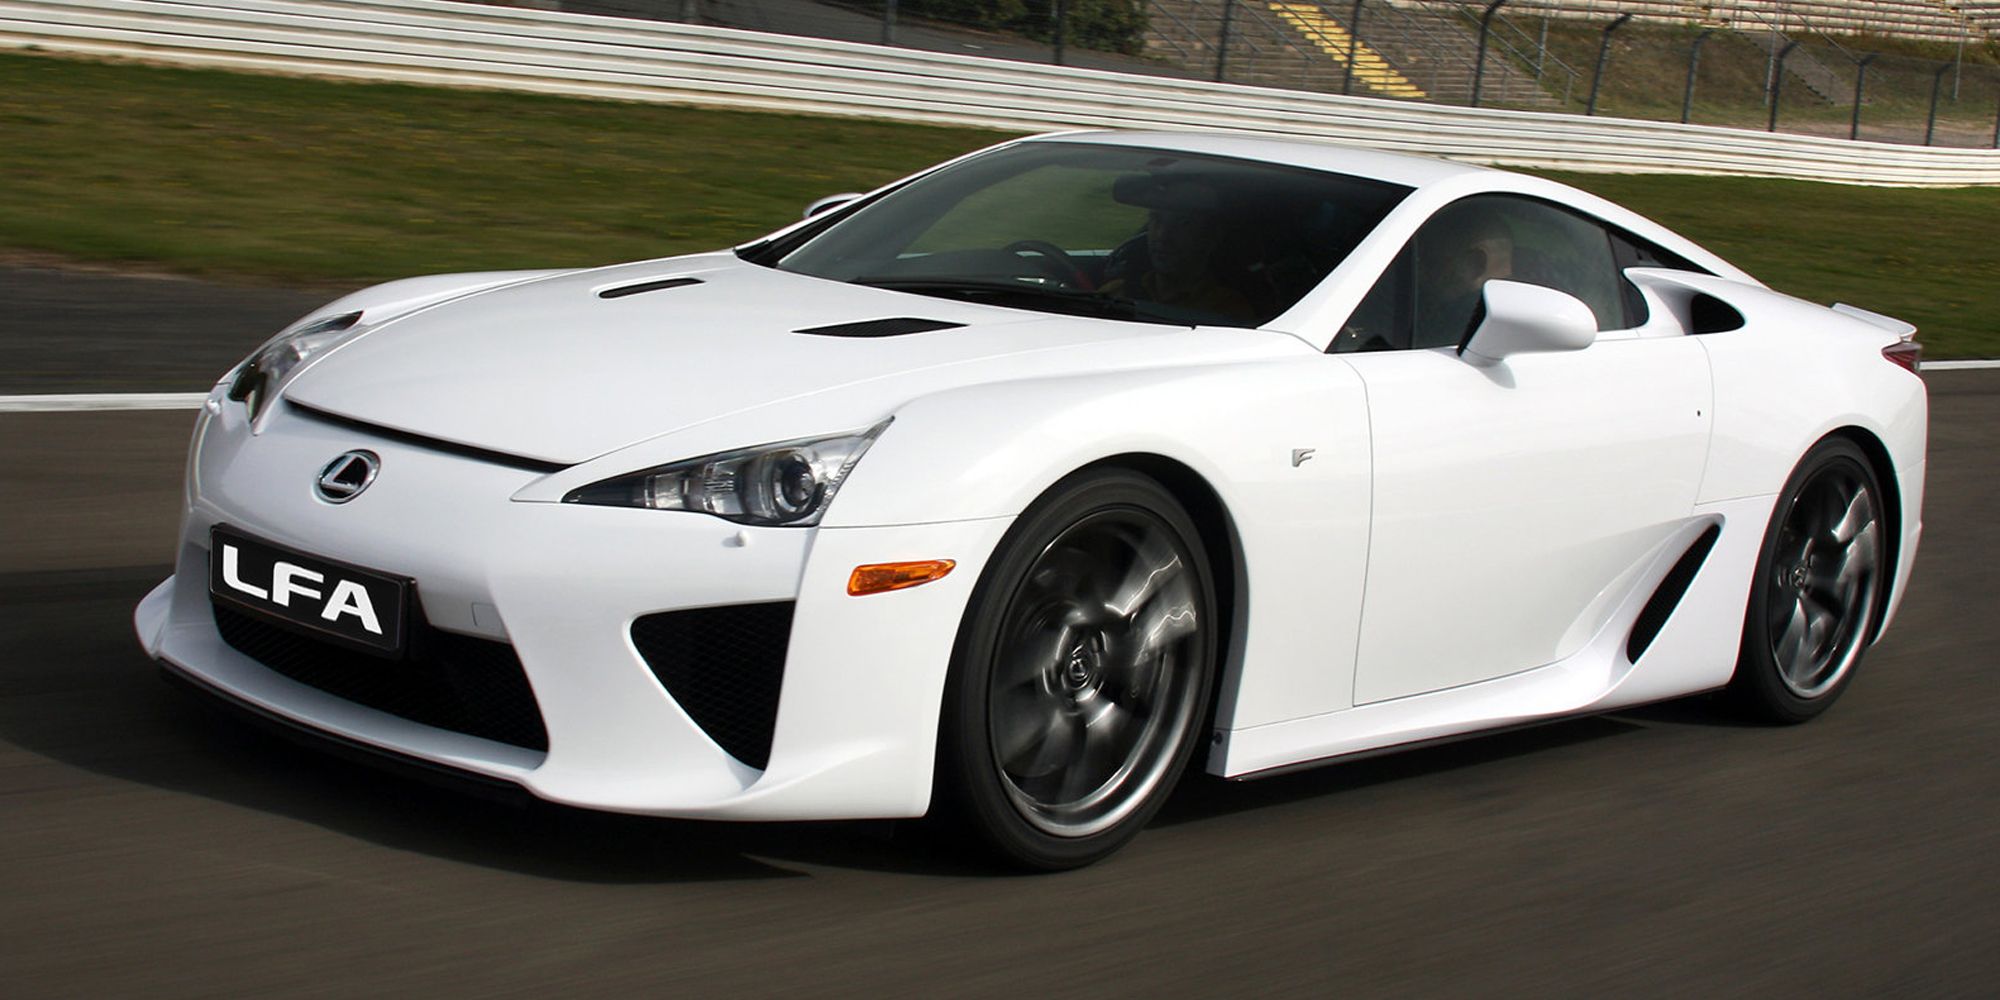 Front 3/4 view of a white LFA on the move on a racetrack